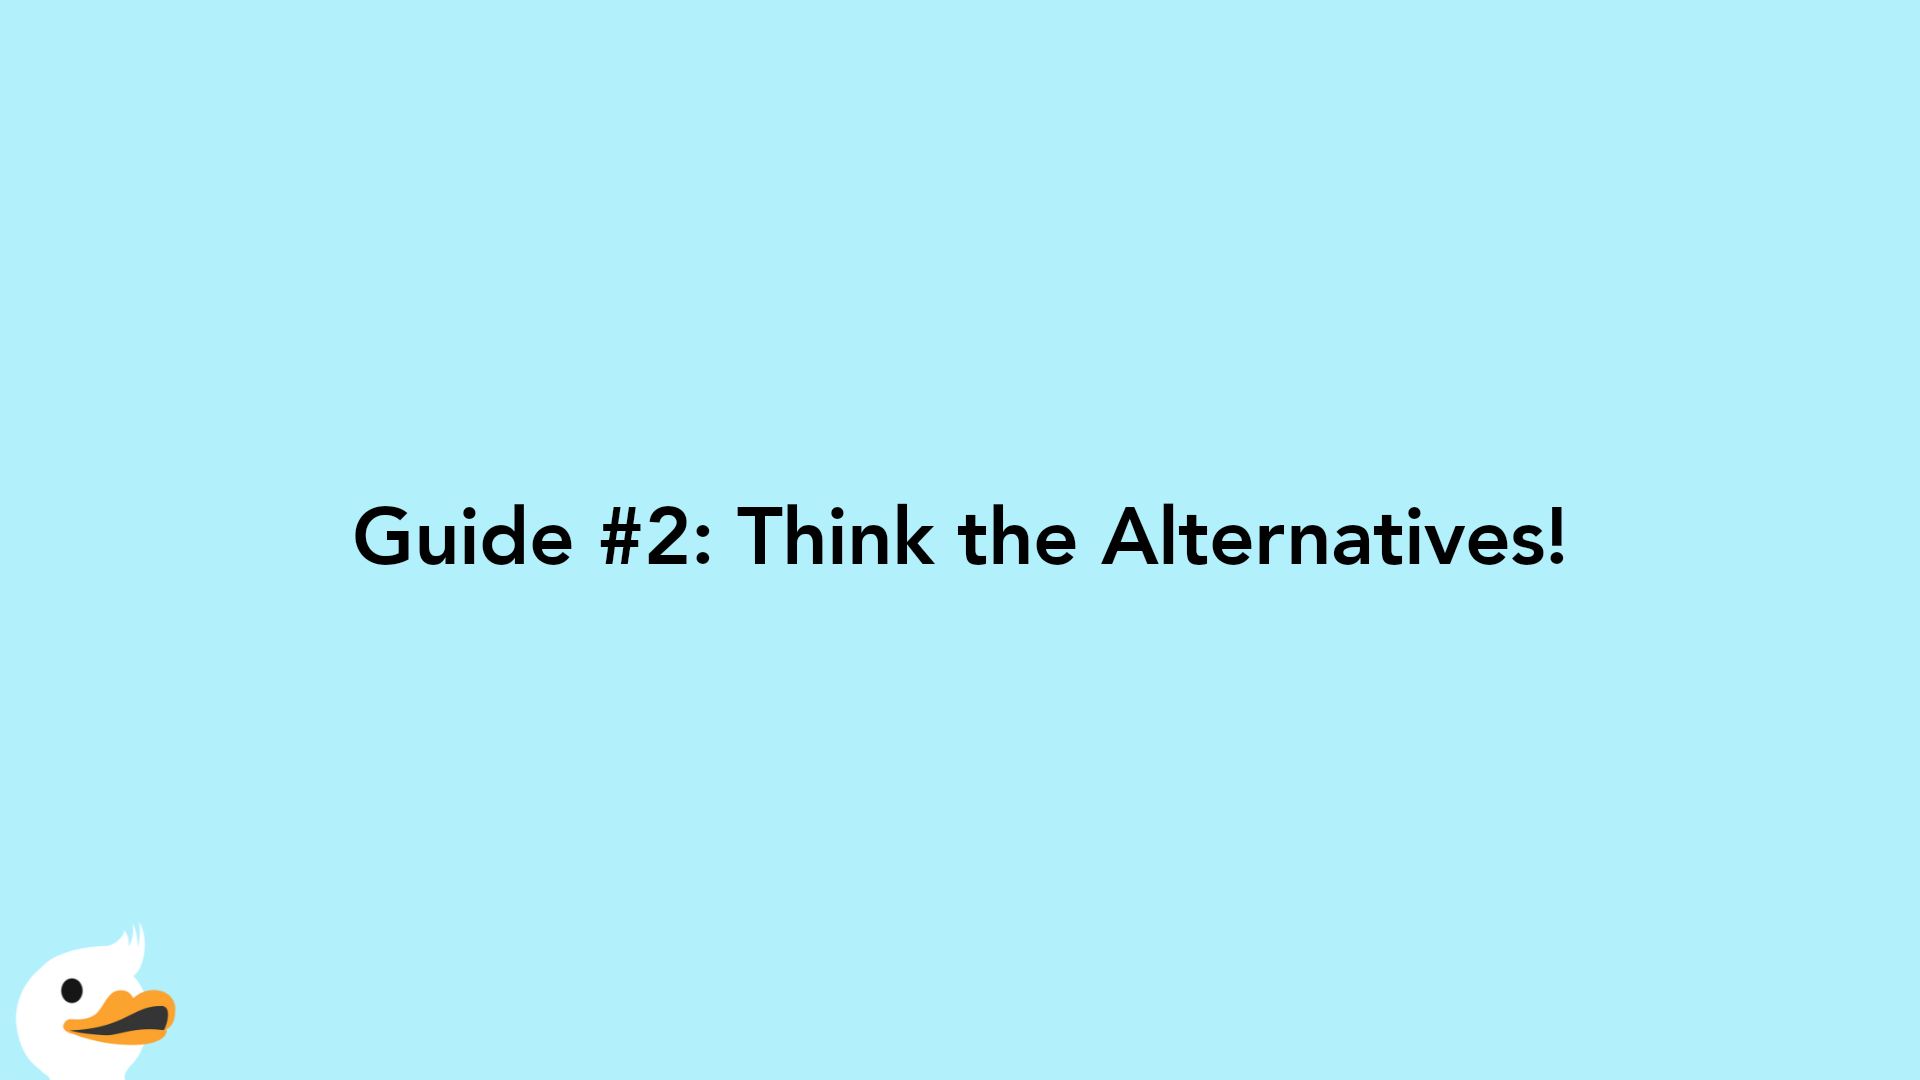 Guide #2: Think the Alternatives!